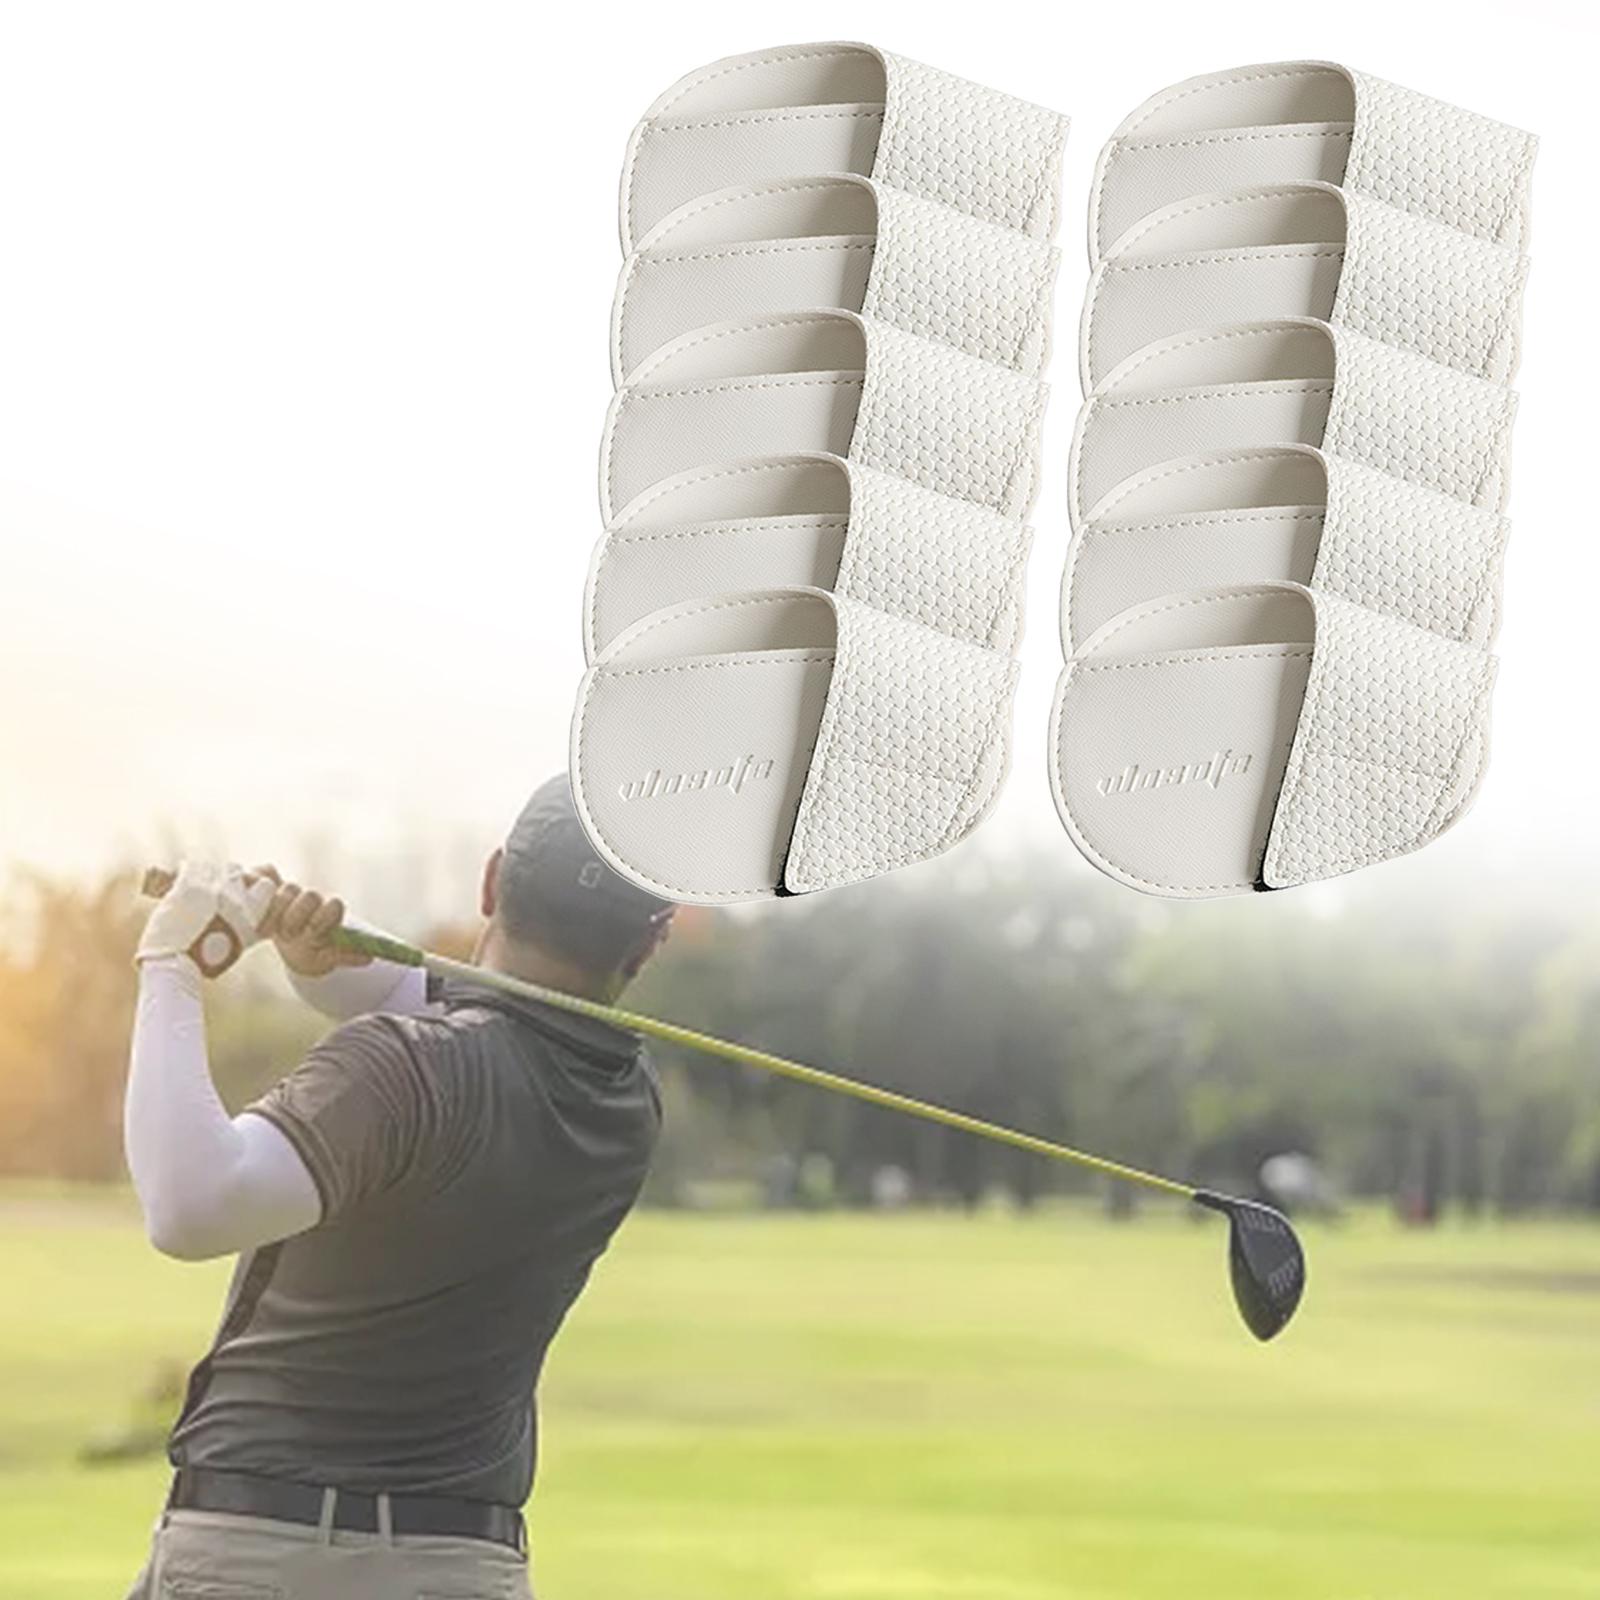 Golf Head Covers PU Portable Protector for Athlete Travel Golf Training White Small